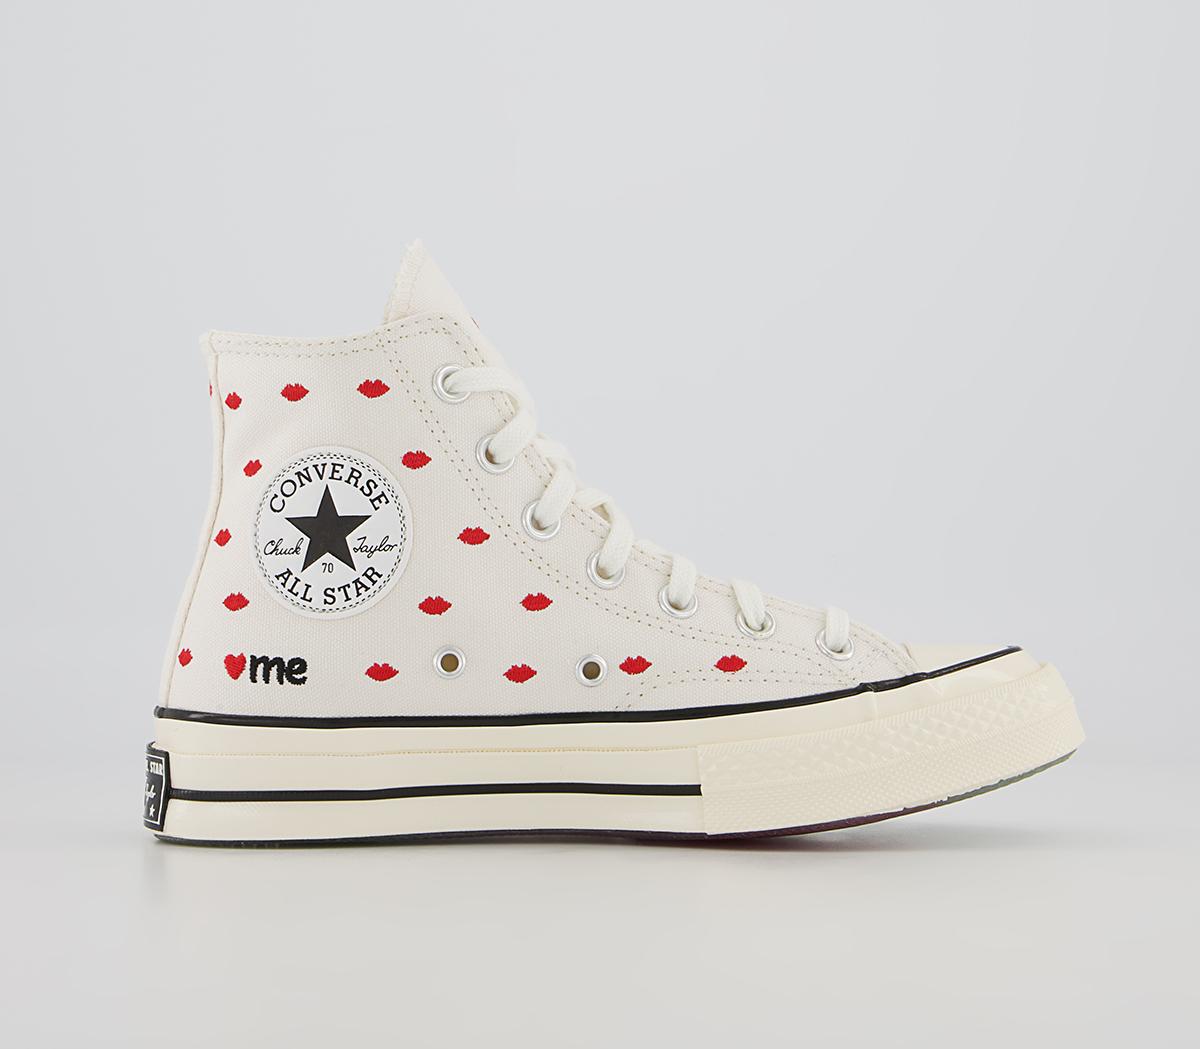 ConverseAll Star Hi 70s TrainersVintage White University Red